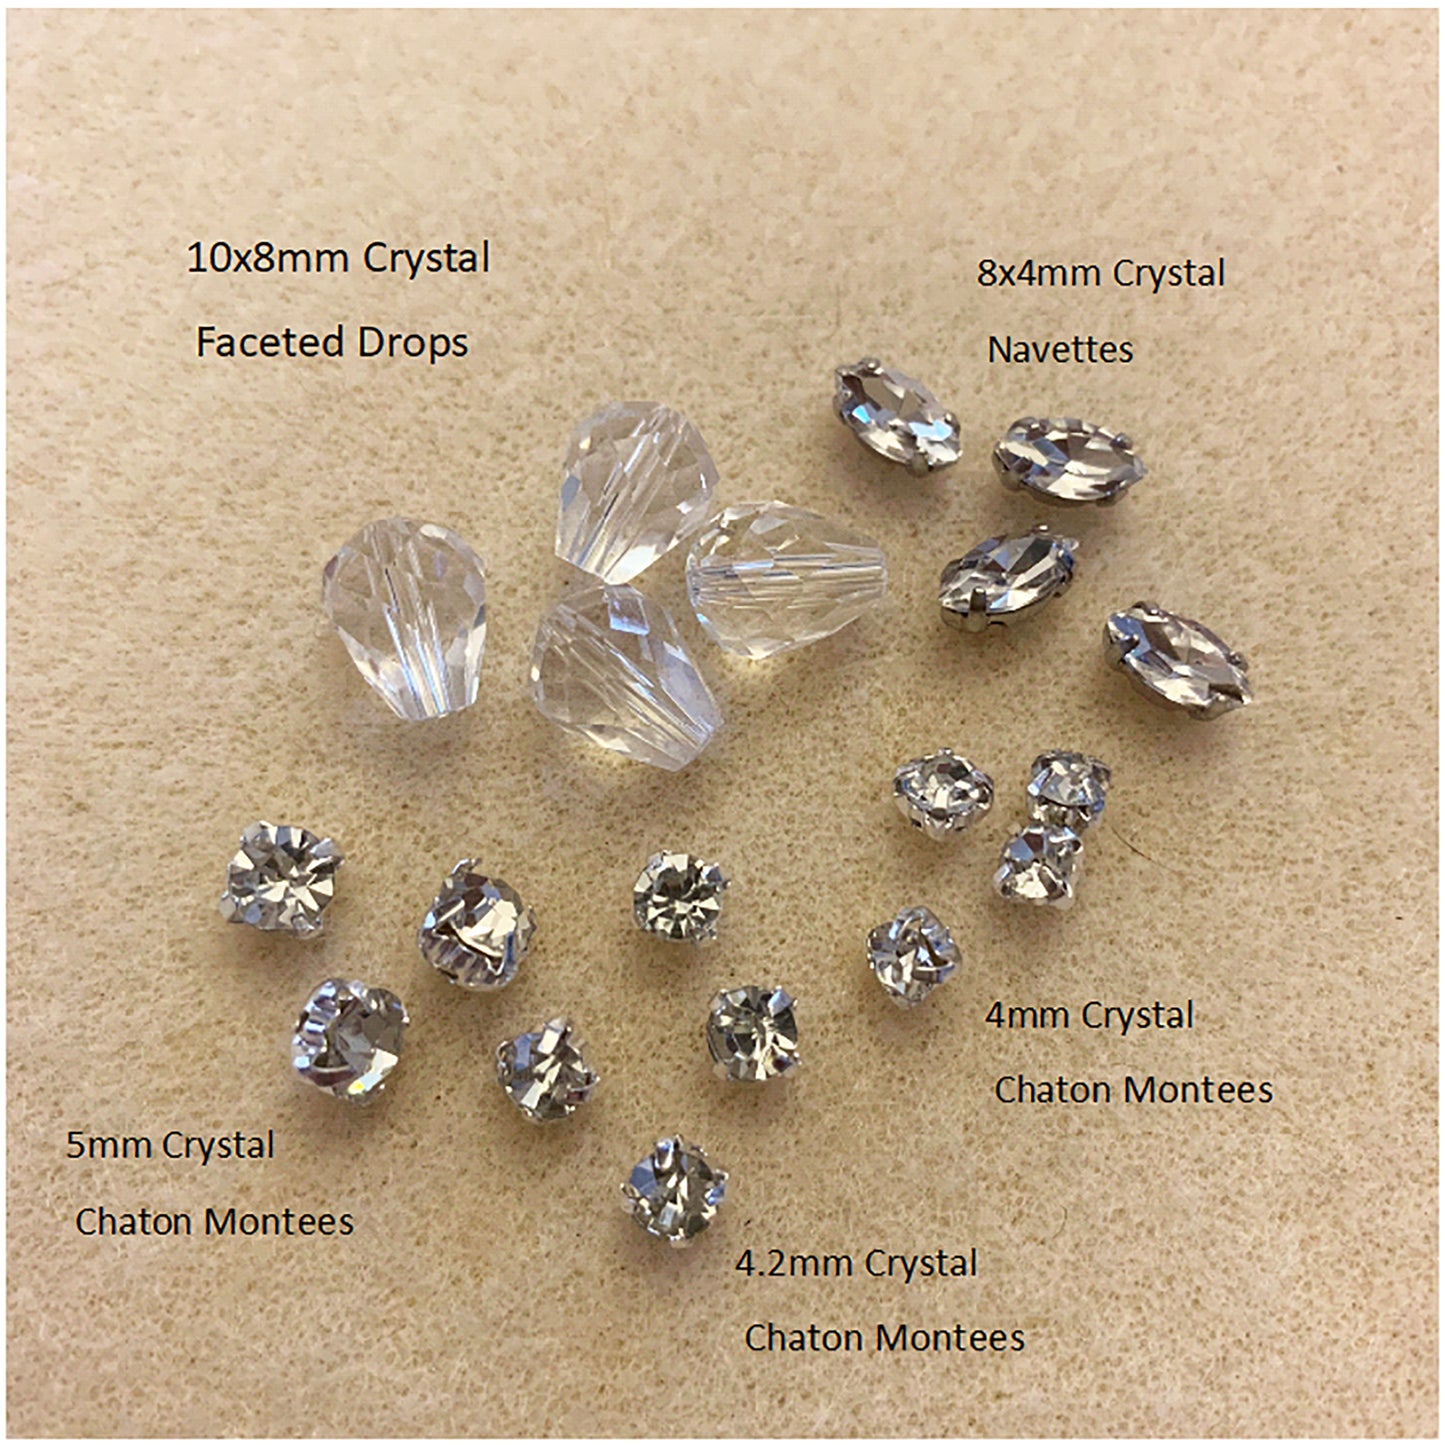 Faceted Drop Beads Glass 10x8mm for Earrings (Pkg of 6)